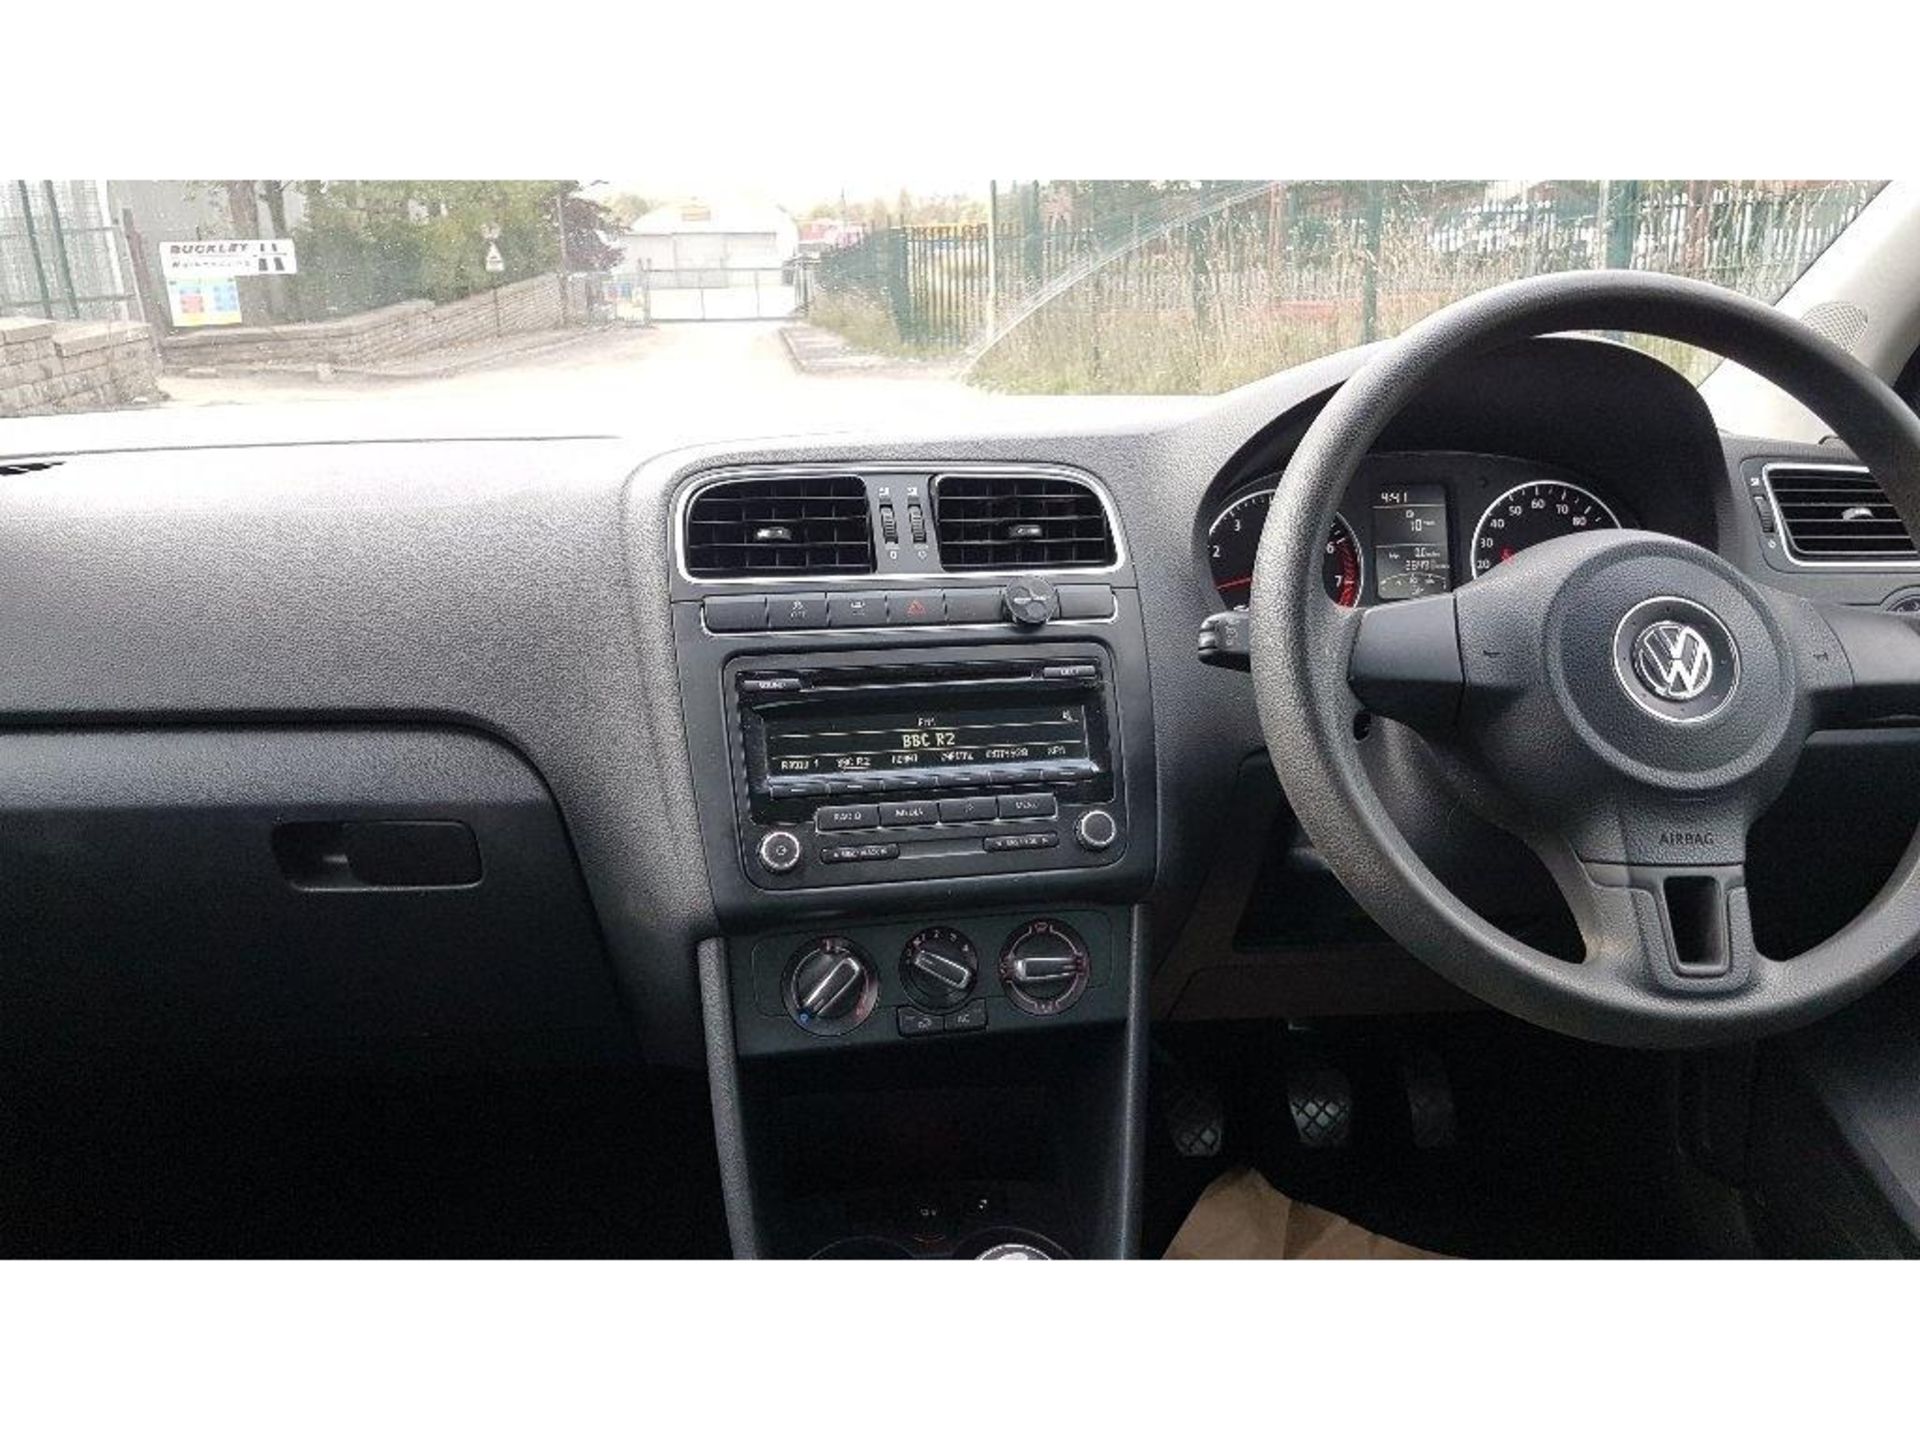 VOLKSWAGEN POLO 1.2 MATCH EDITION 5DR, FT13 HHY, 20.05.2013, PETROL, MILEAGE 28,499, MANUAL, 1.2L, 2 - Image 13 of 19